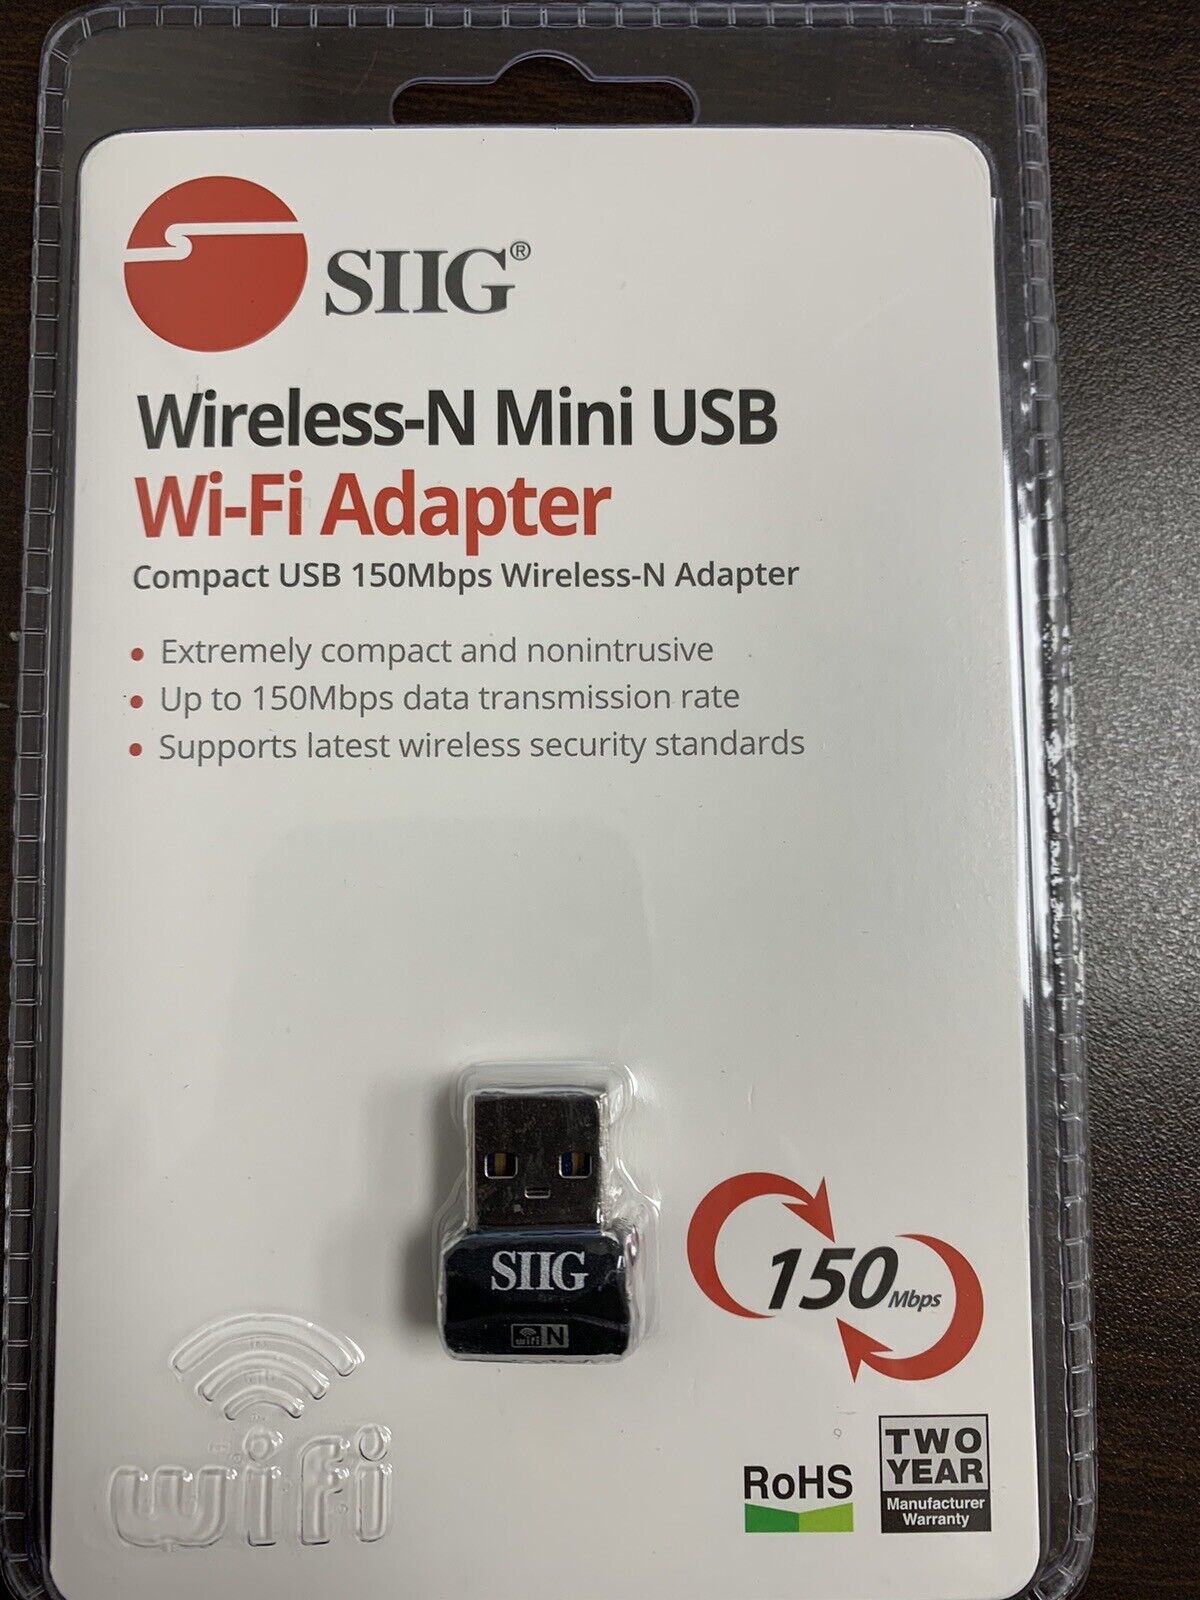 Siig Ieee 802.11N - Wi-Fi Adapter For Computer/Notebook Brand New & Sealed